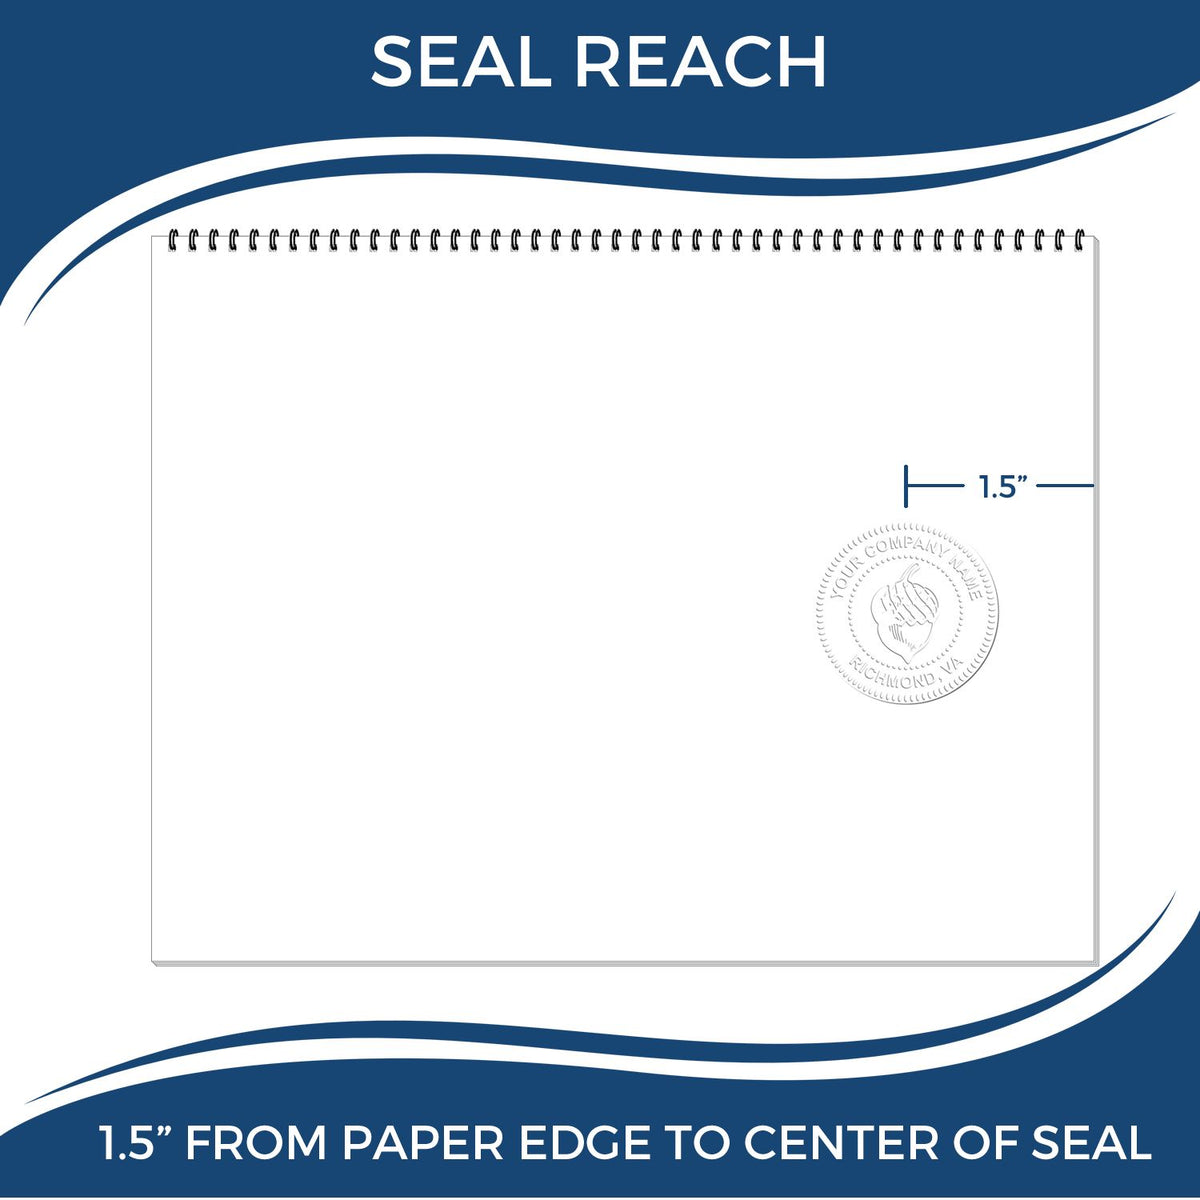 An infographic showing the seal reach which is represented by a ruler and a miniature seal image of the Handheld South Dakota Architect Seal Embosser